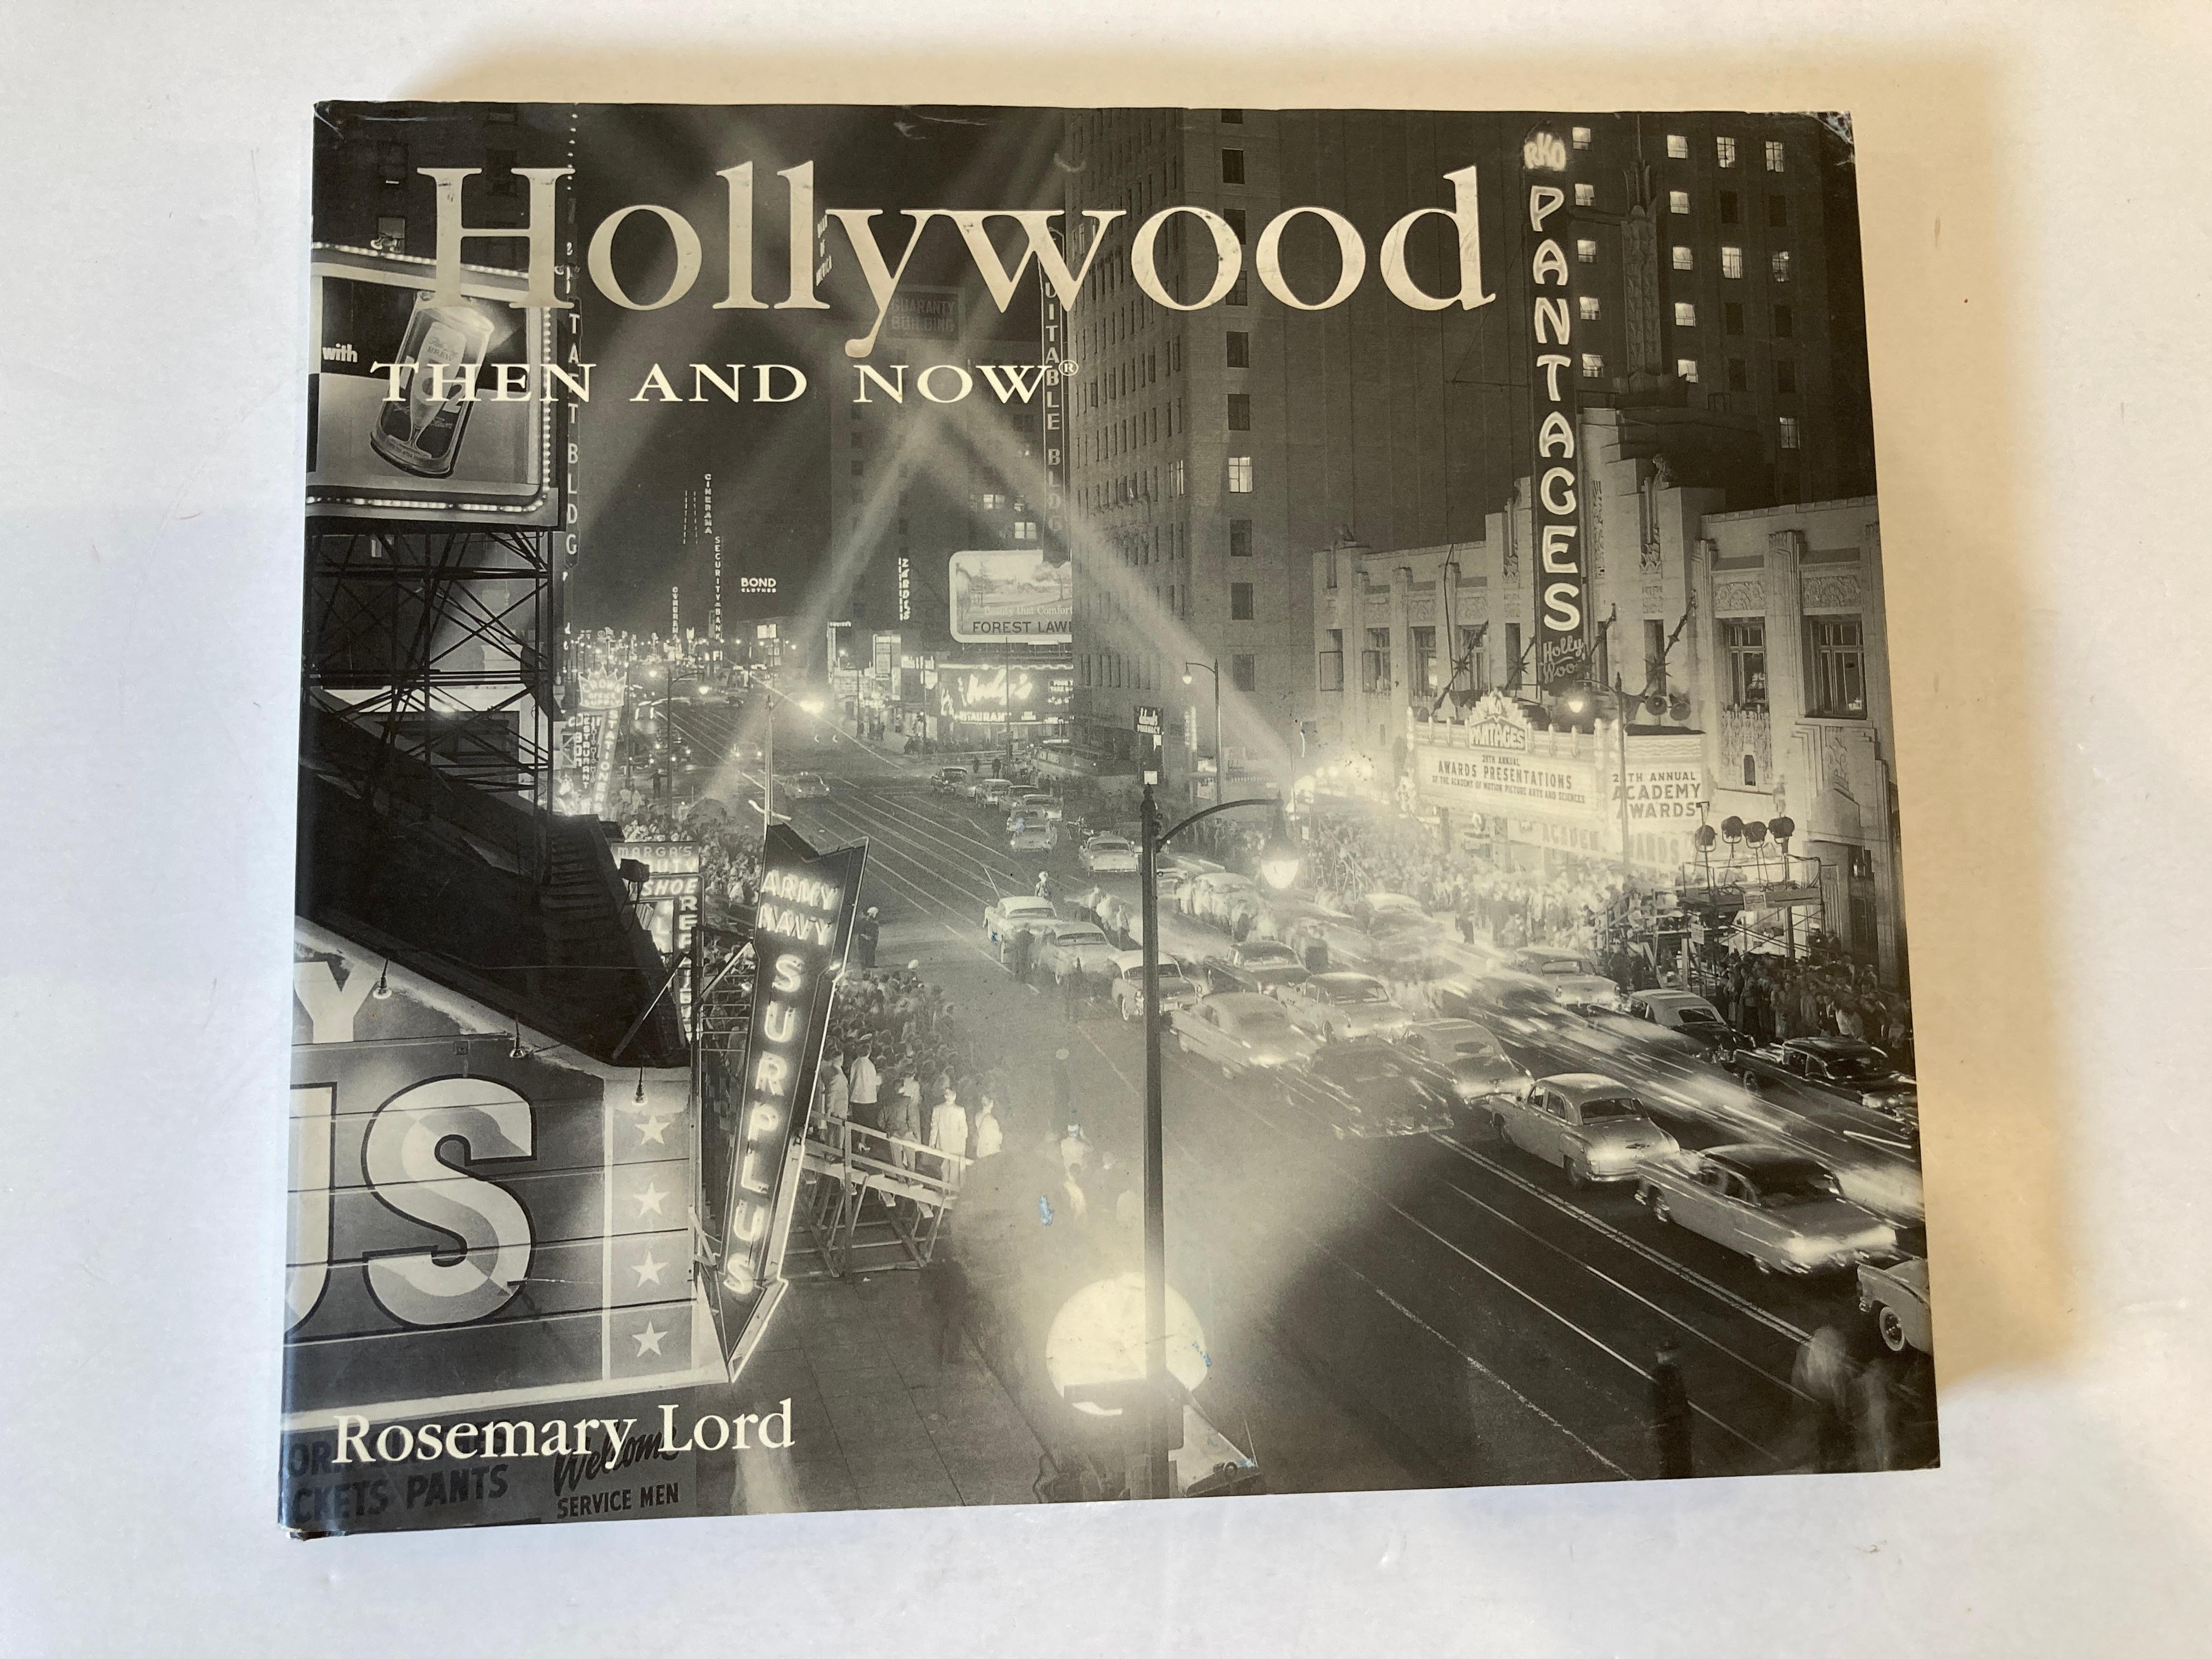 Hollywood then and now
Lord, Rosemary.
The film industry came to Hollywood in the early 1900s and Hollywood became a glamour factory, a city of fantasy. It was the home of the stars and the famous Hollywood sign beckoned through the smog, drawing